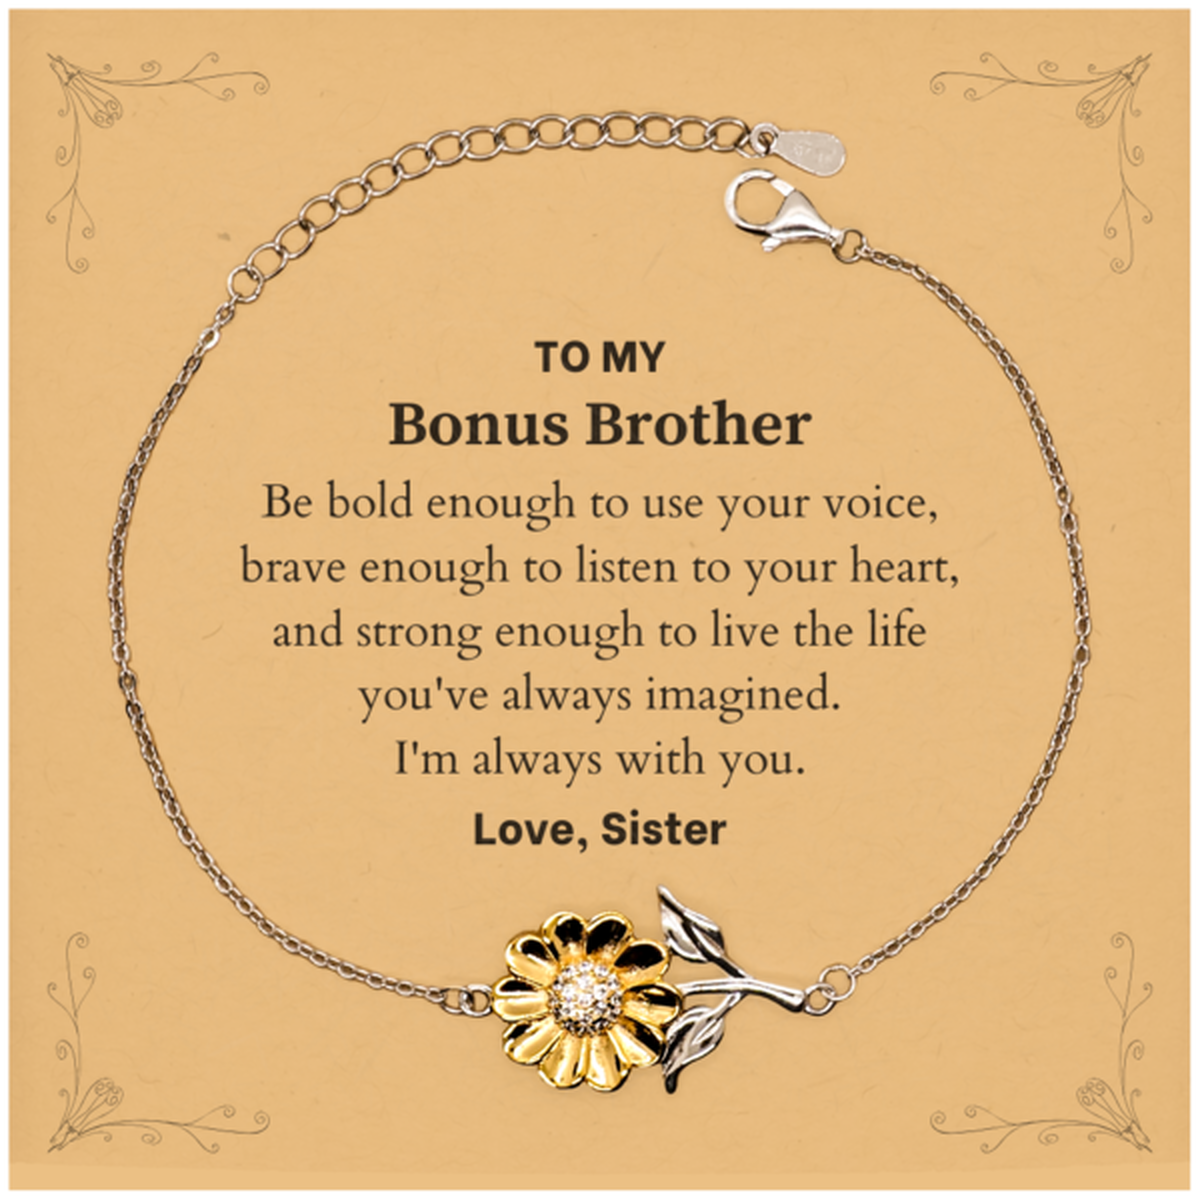 Keepsake Bonus Brother Sunflower Bracelet Gift Idea Graduation Christmas Birthday Bonus Brother from Sister, Bonus Brother Be bold enough to use your voice, brave enough to listen to your heart. Love, Sister